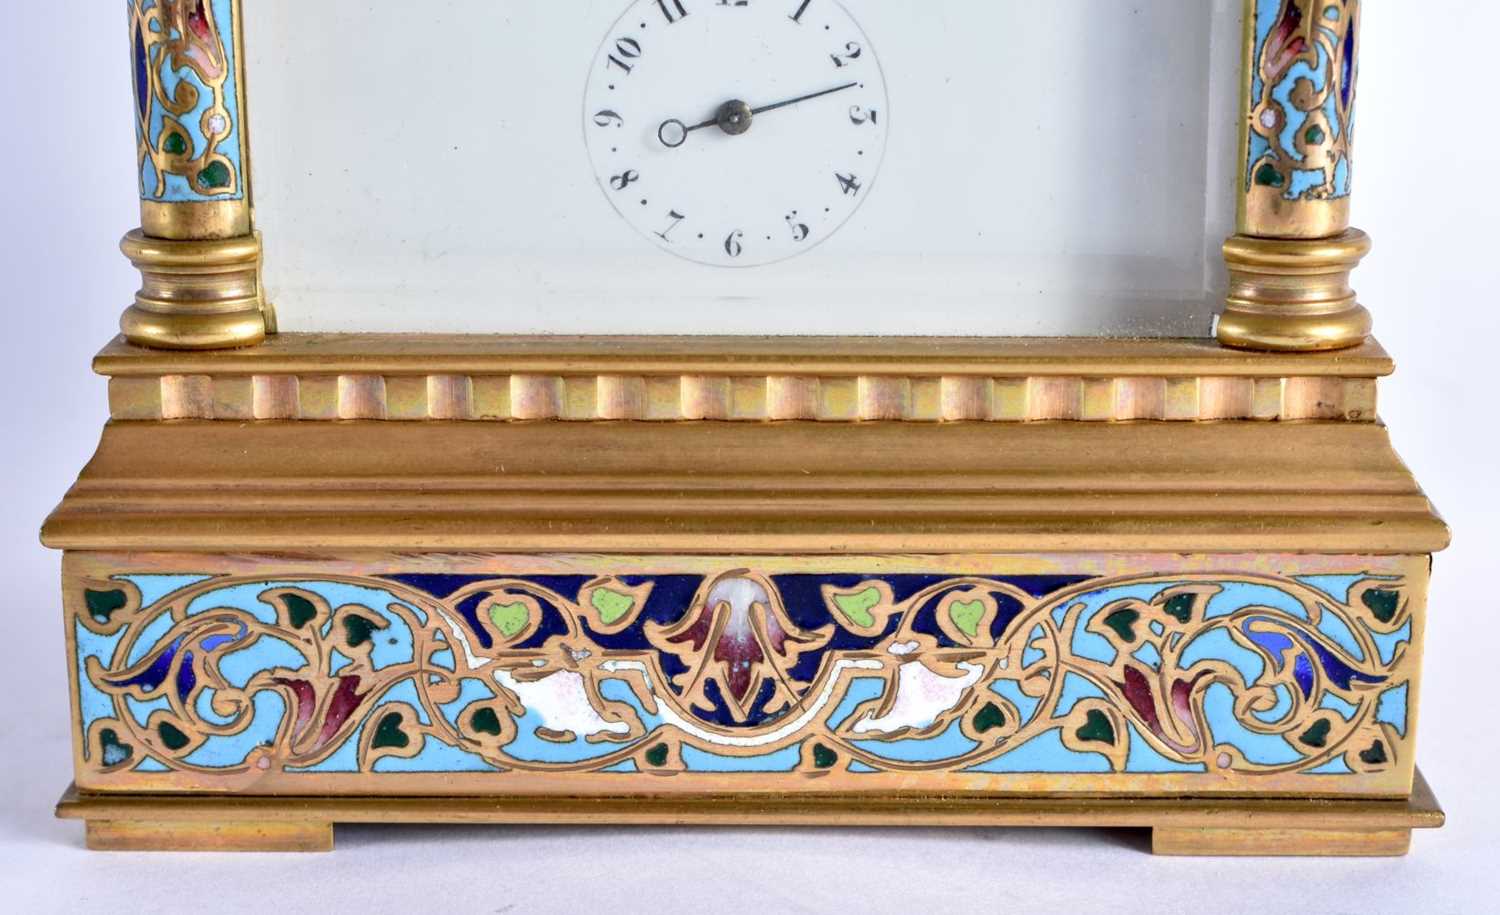 A LOVELY 19TH CENTURY FRENCH CHINESE MARKET CHAMPLEVE ENAMEL AND BRONZE REPEATING CARRIAGE CLOCK the - Image 3 of 8